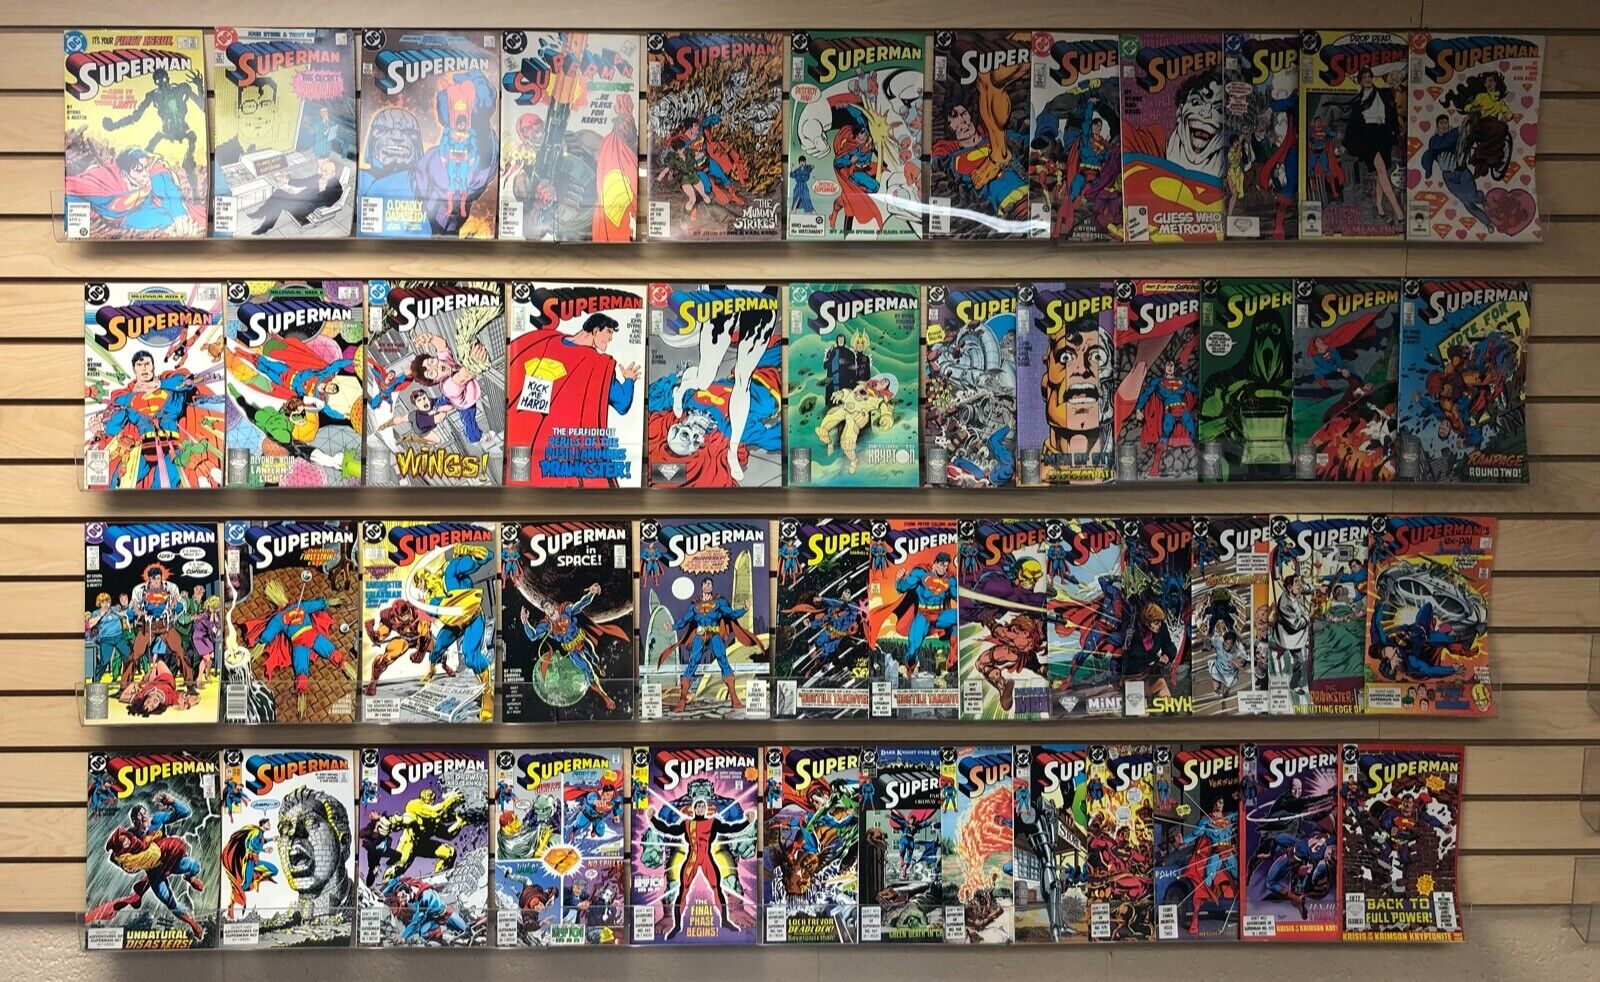 SUPERMAN #1 to #50 DC comics by JOHN BYRNE in 1987.....COMPLETE!....ONLY $19.95!